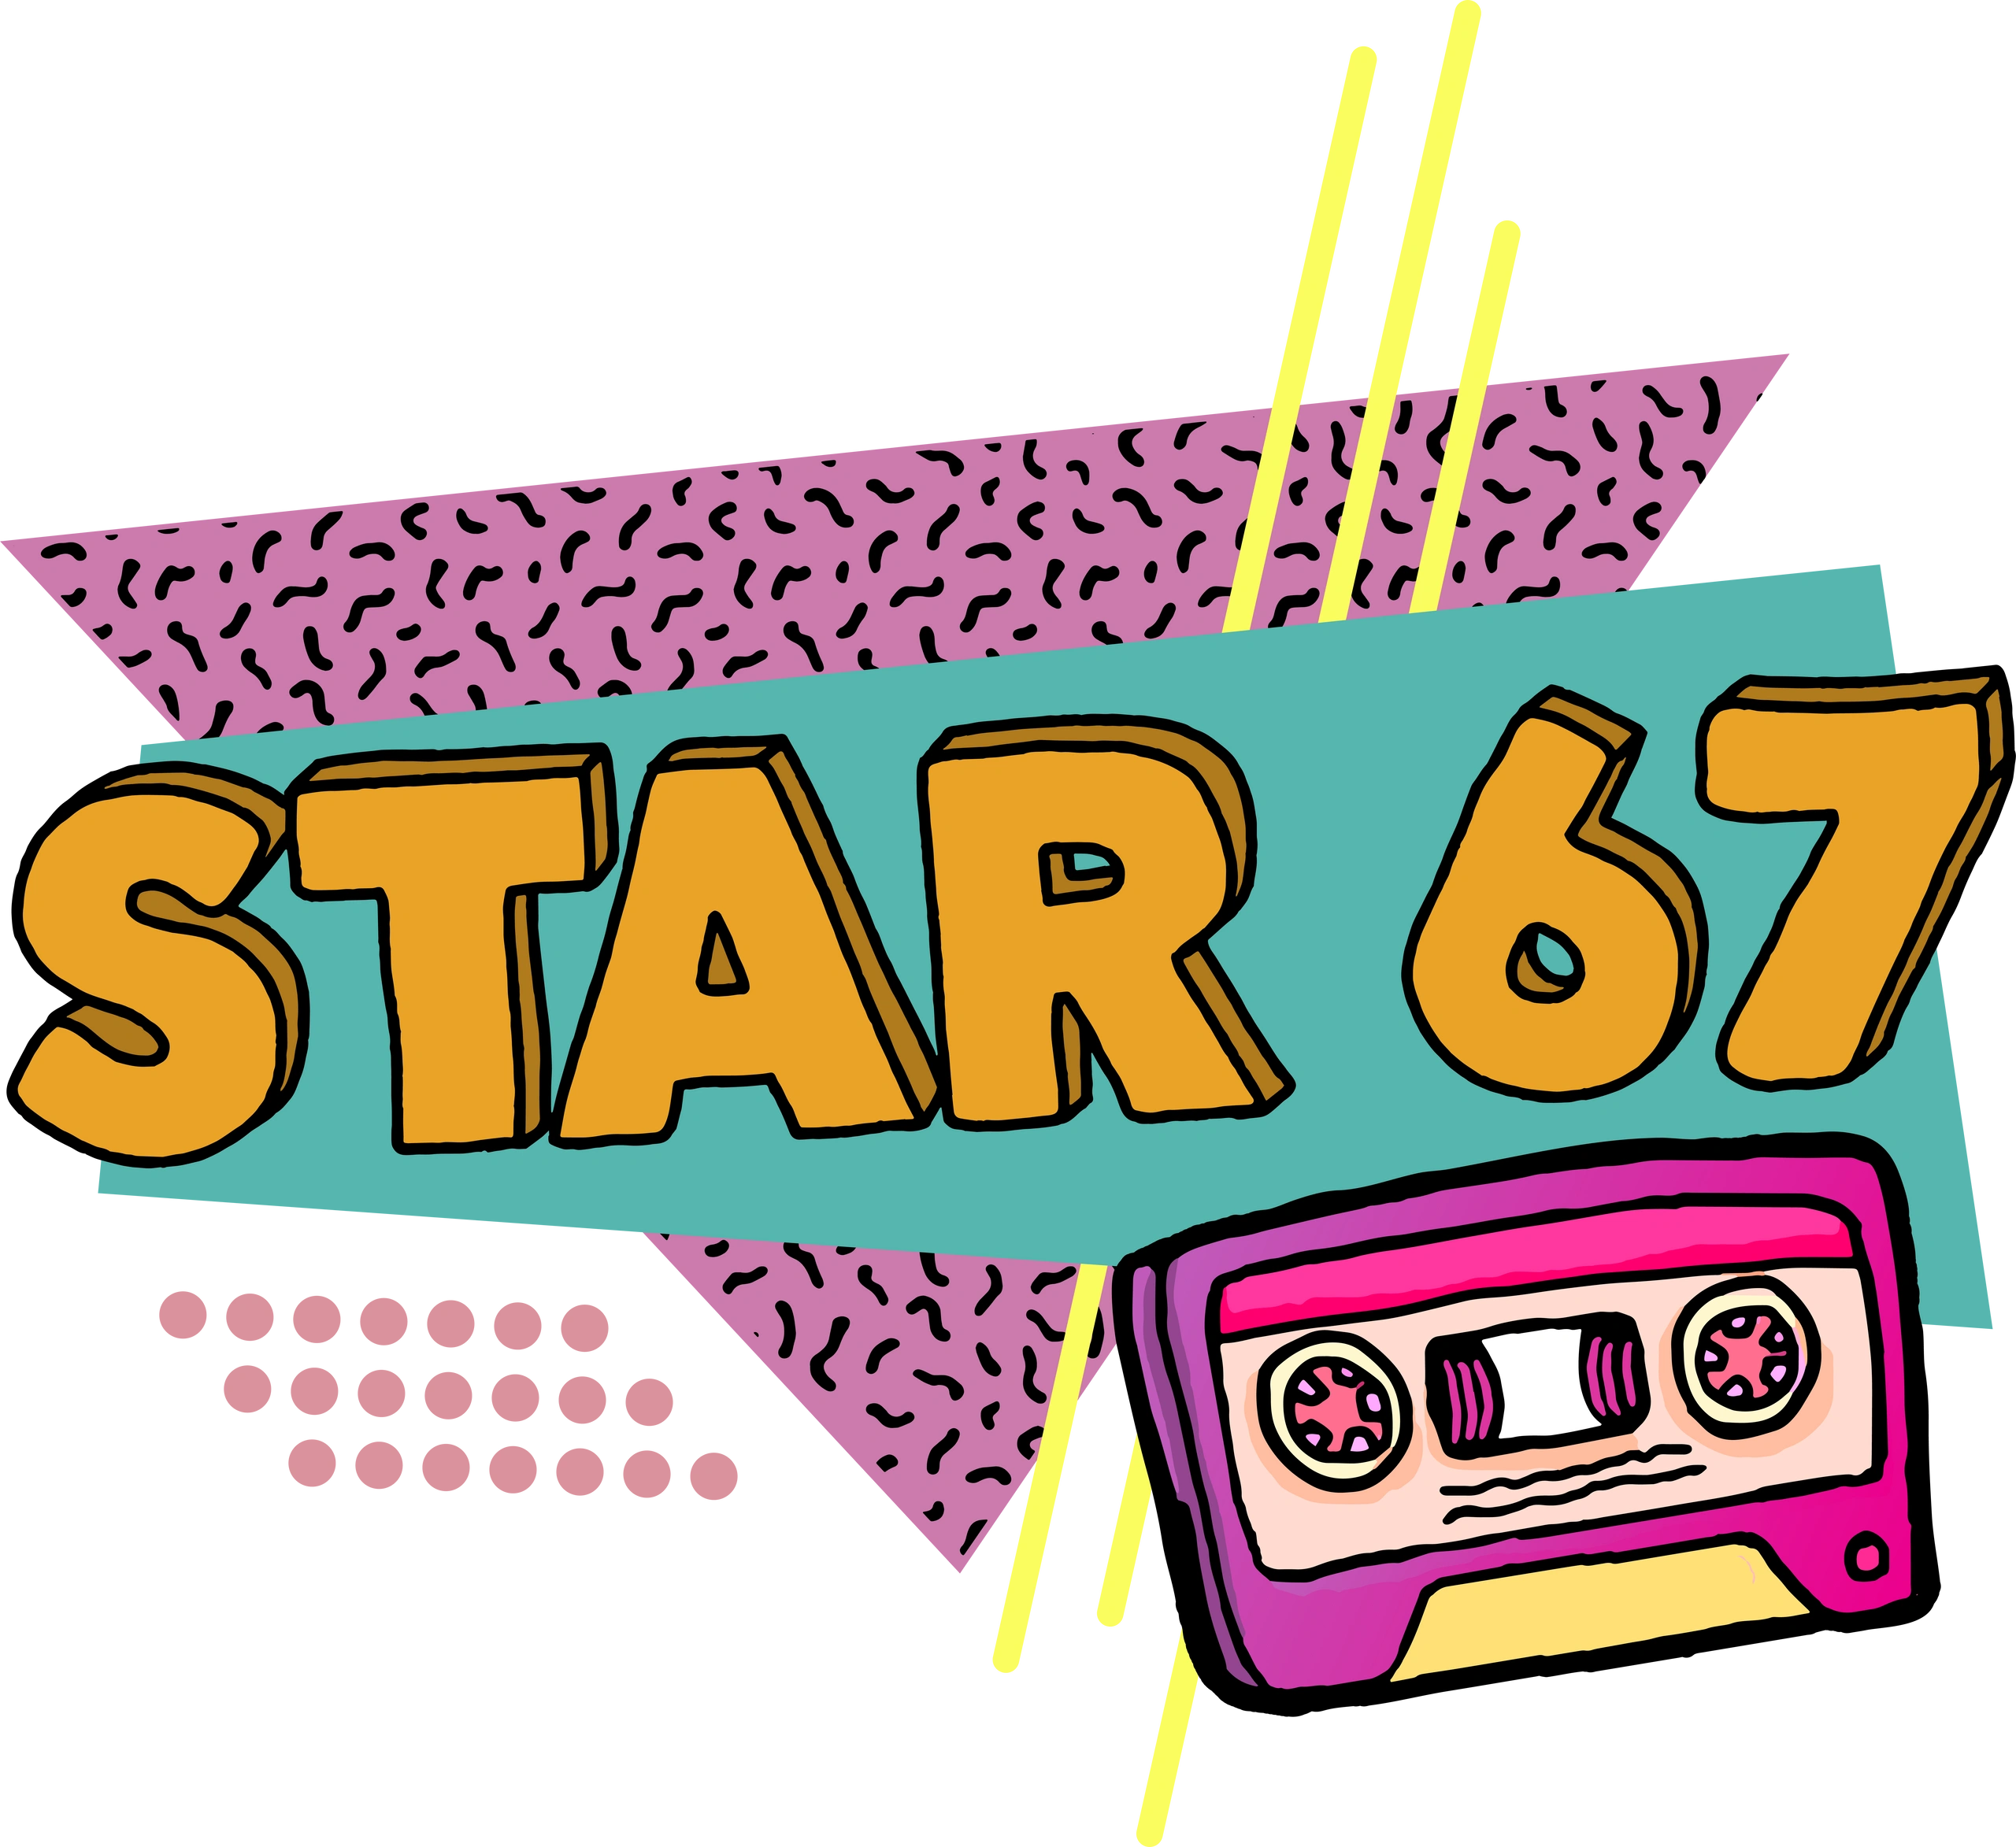 Star 67 90s cover band